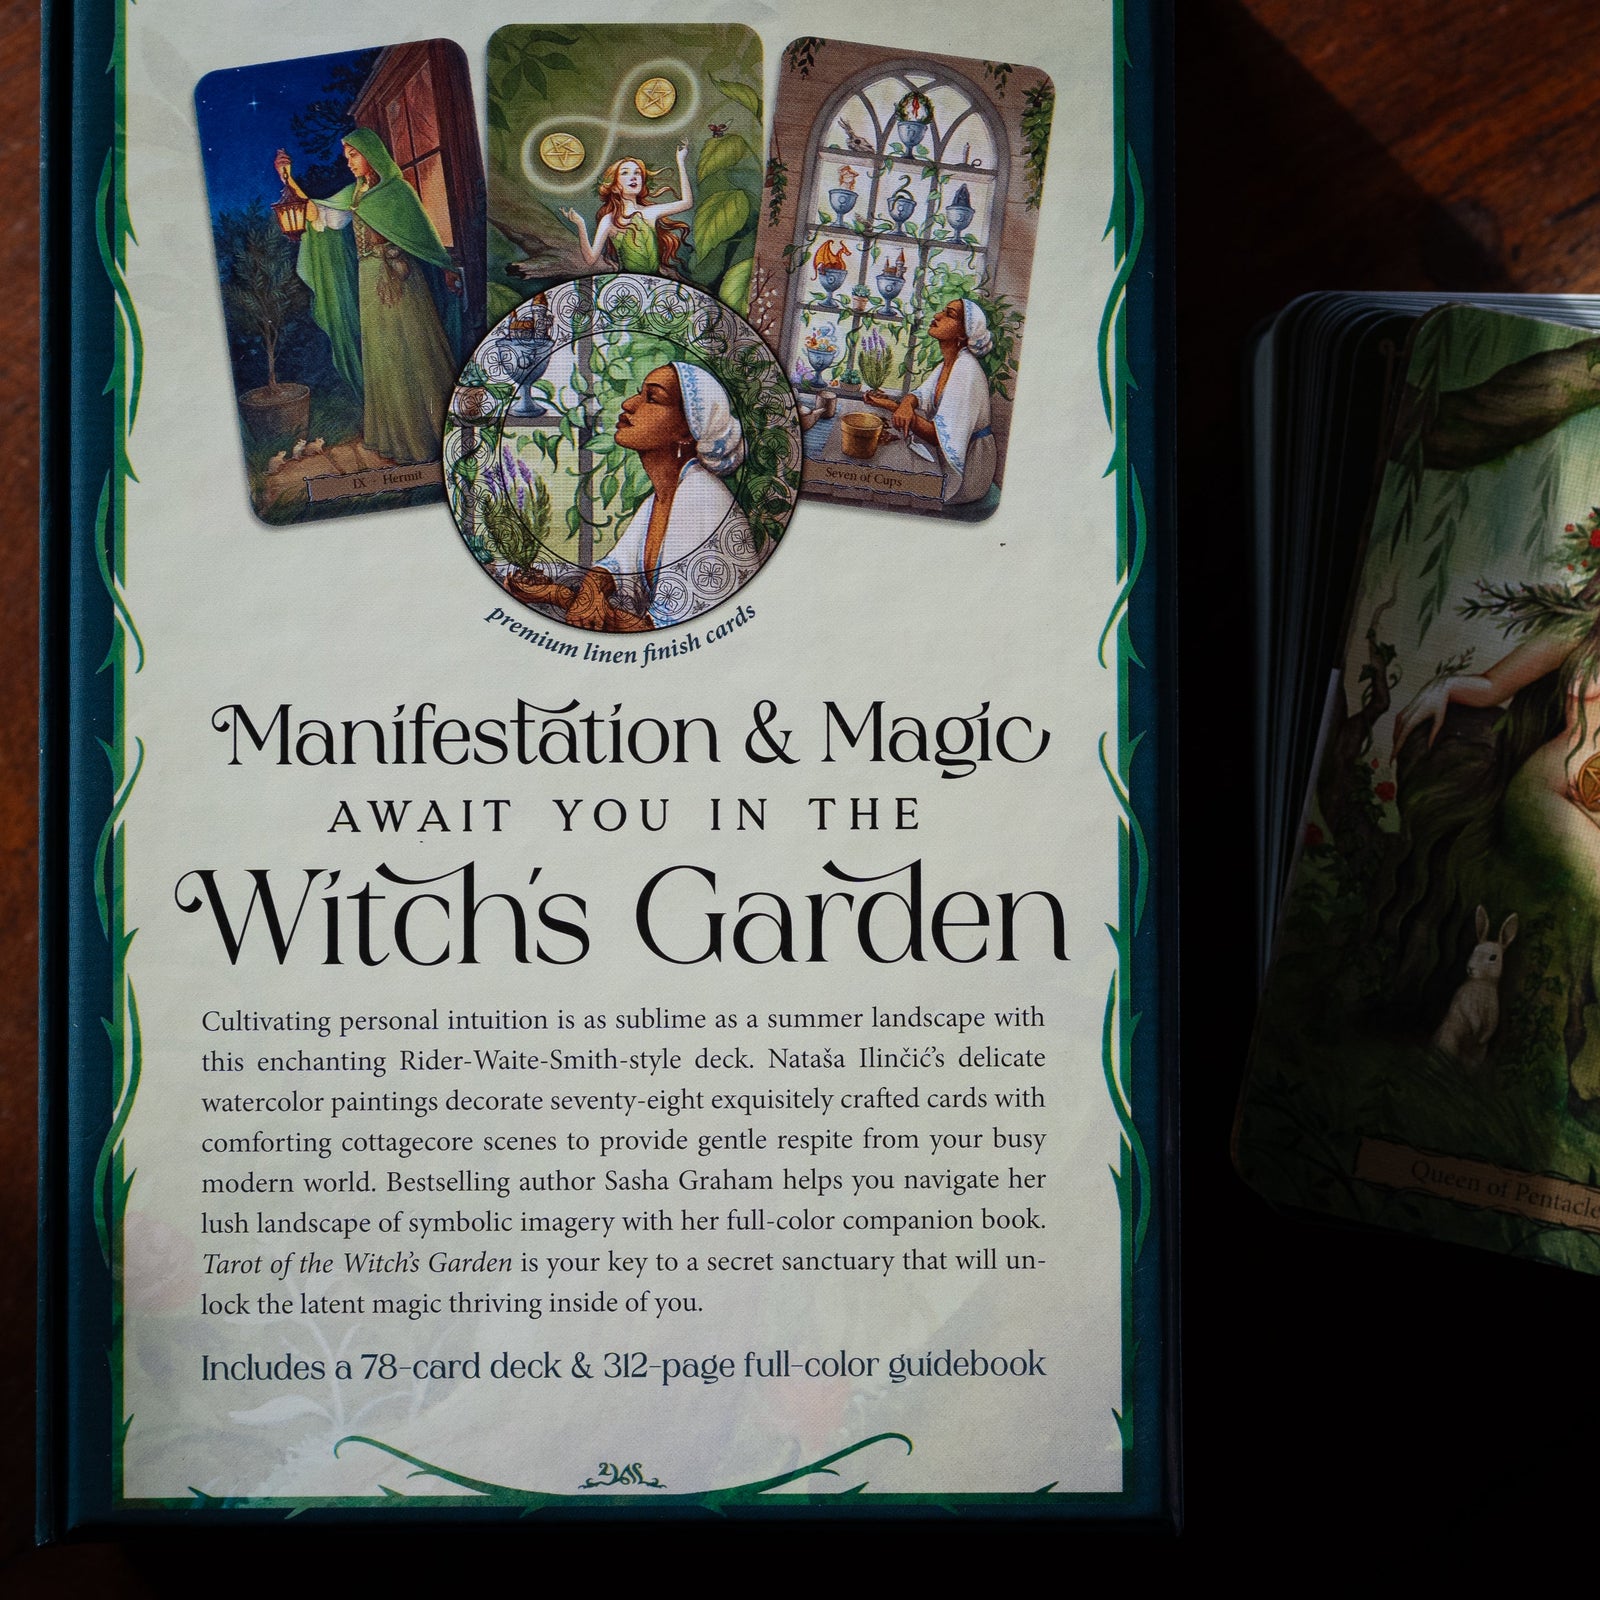 Tarot of The Witch's Garden